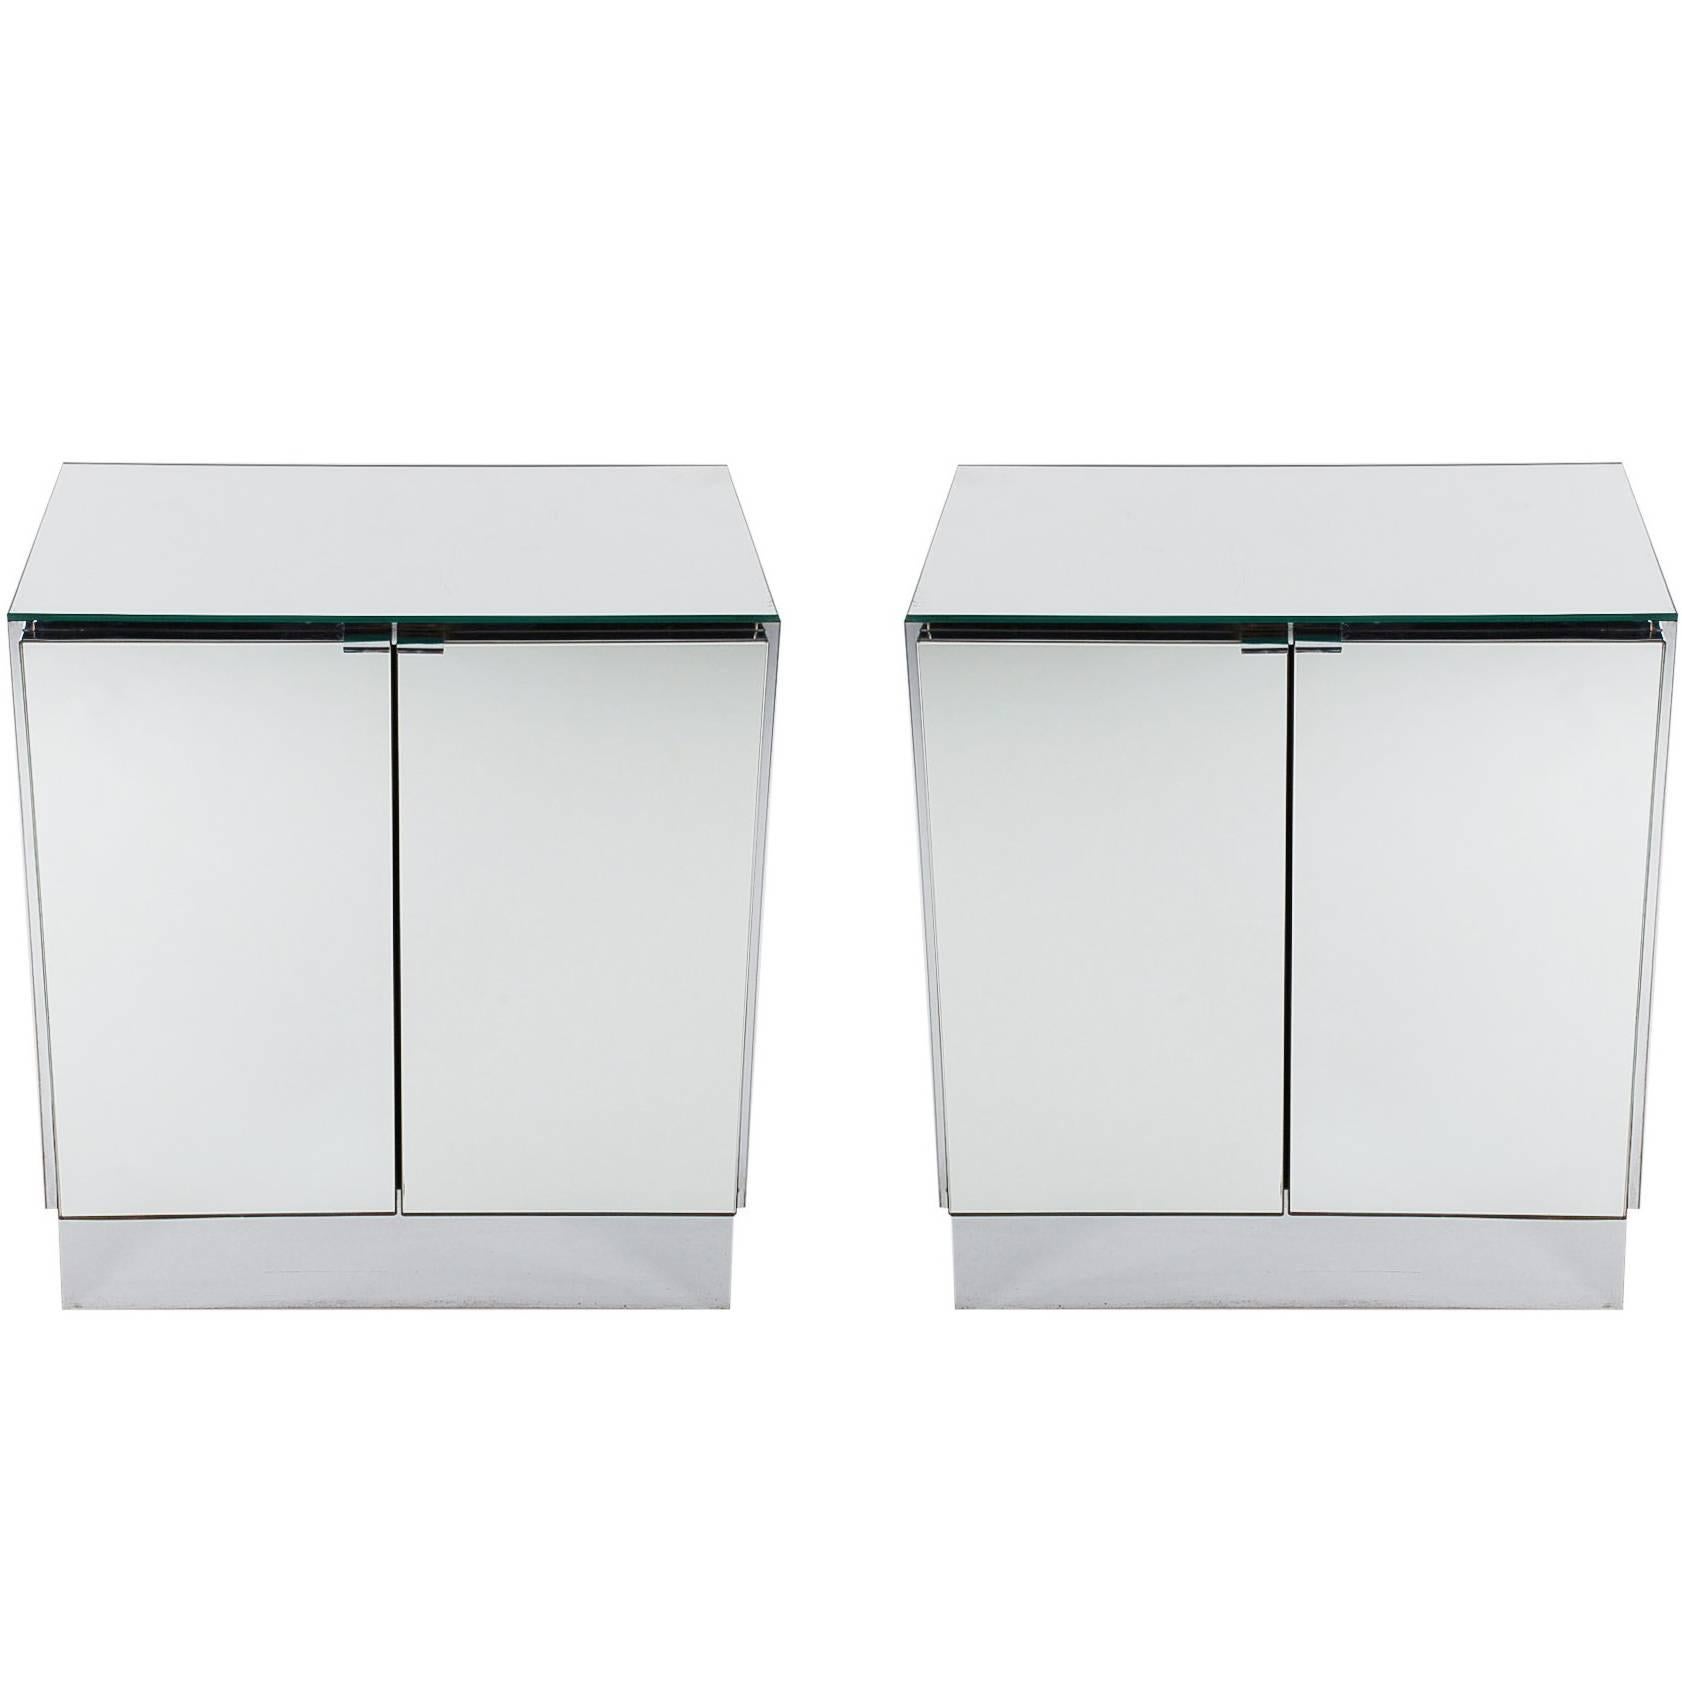 Hollywood Regency Mirrored Cabinets, End Tables or Nightstands by Ello